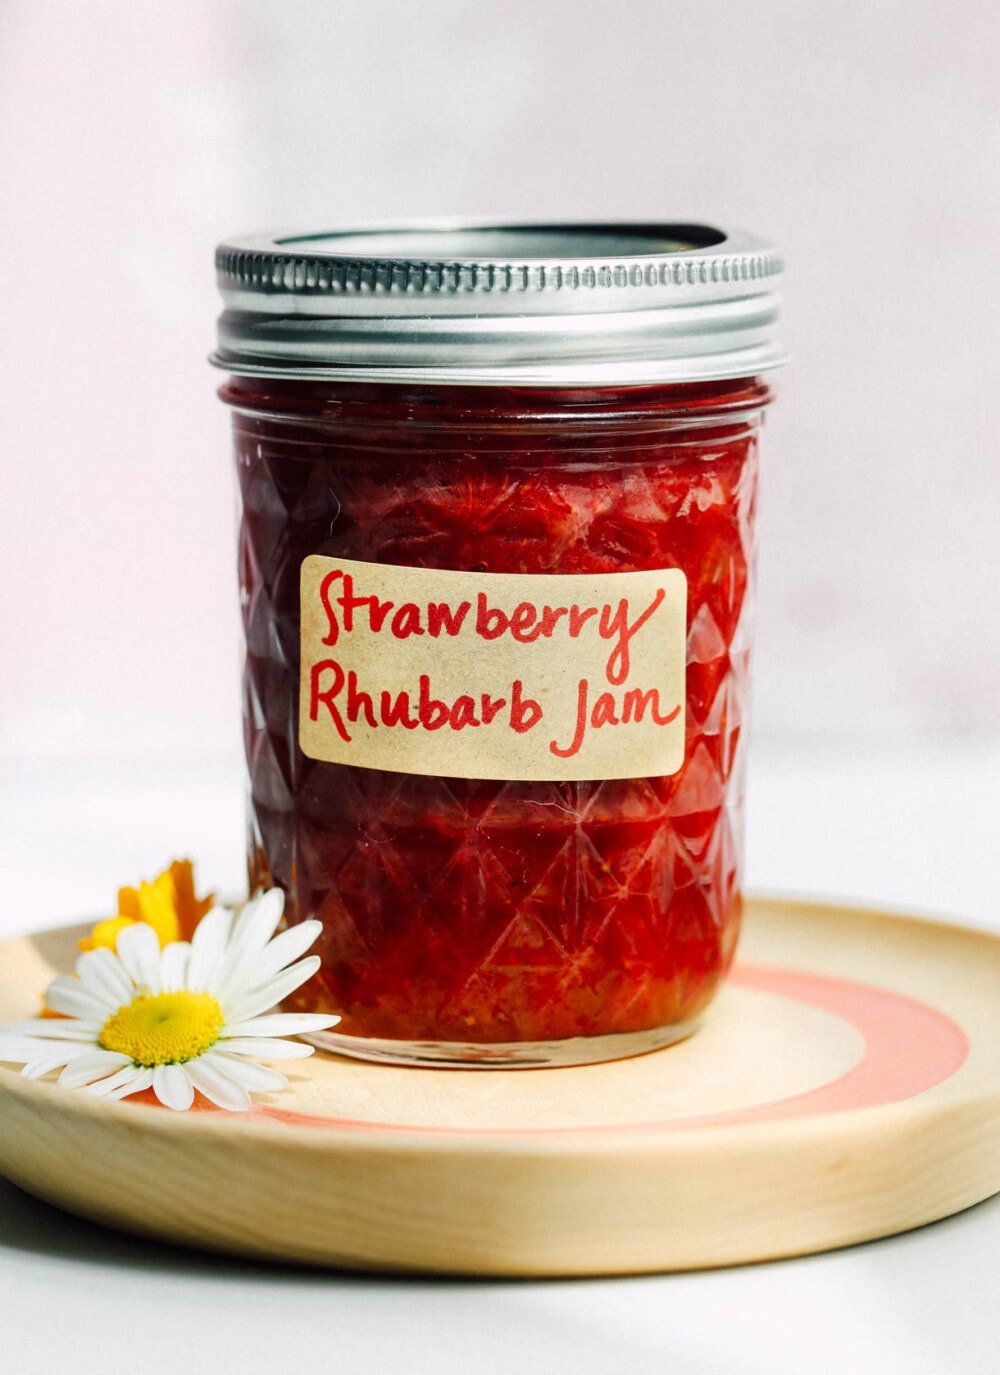 strawberry rhubarb jam in a glass jar with label, sitting on a wooden coaster